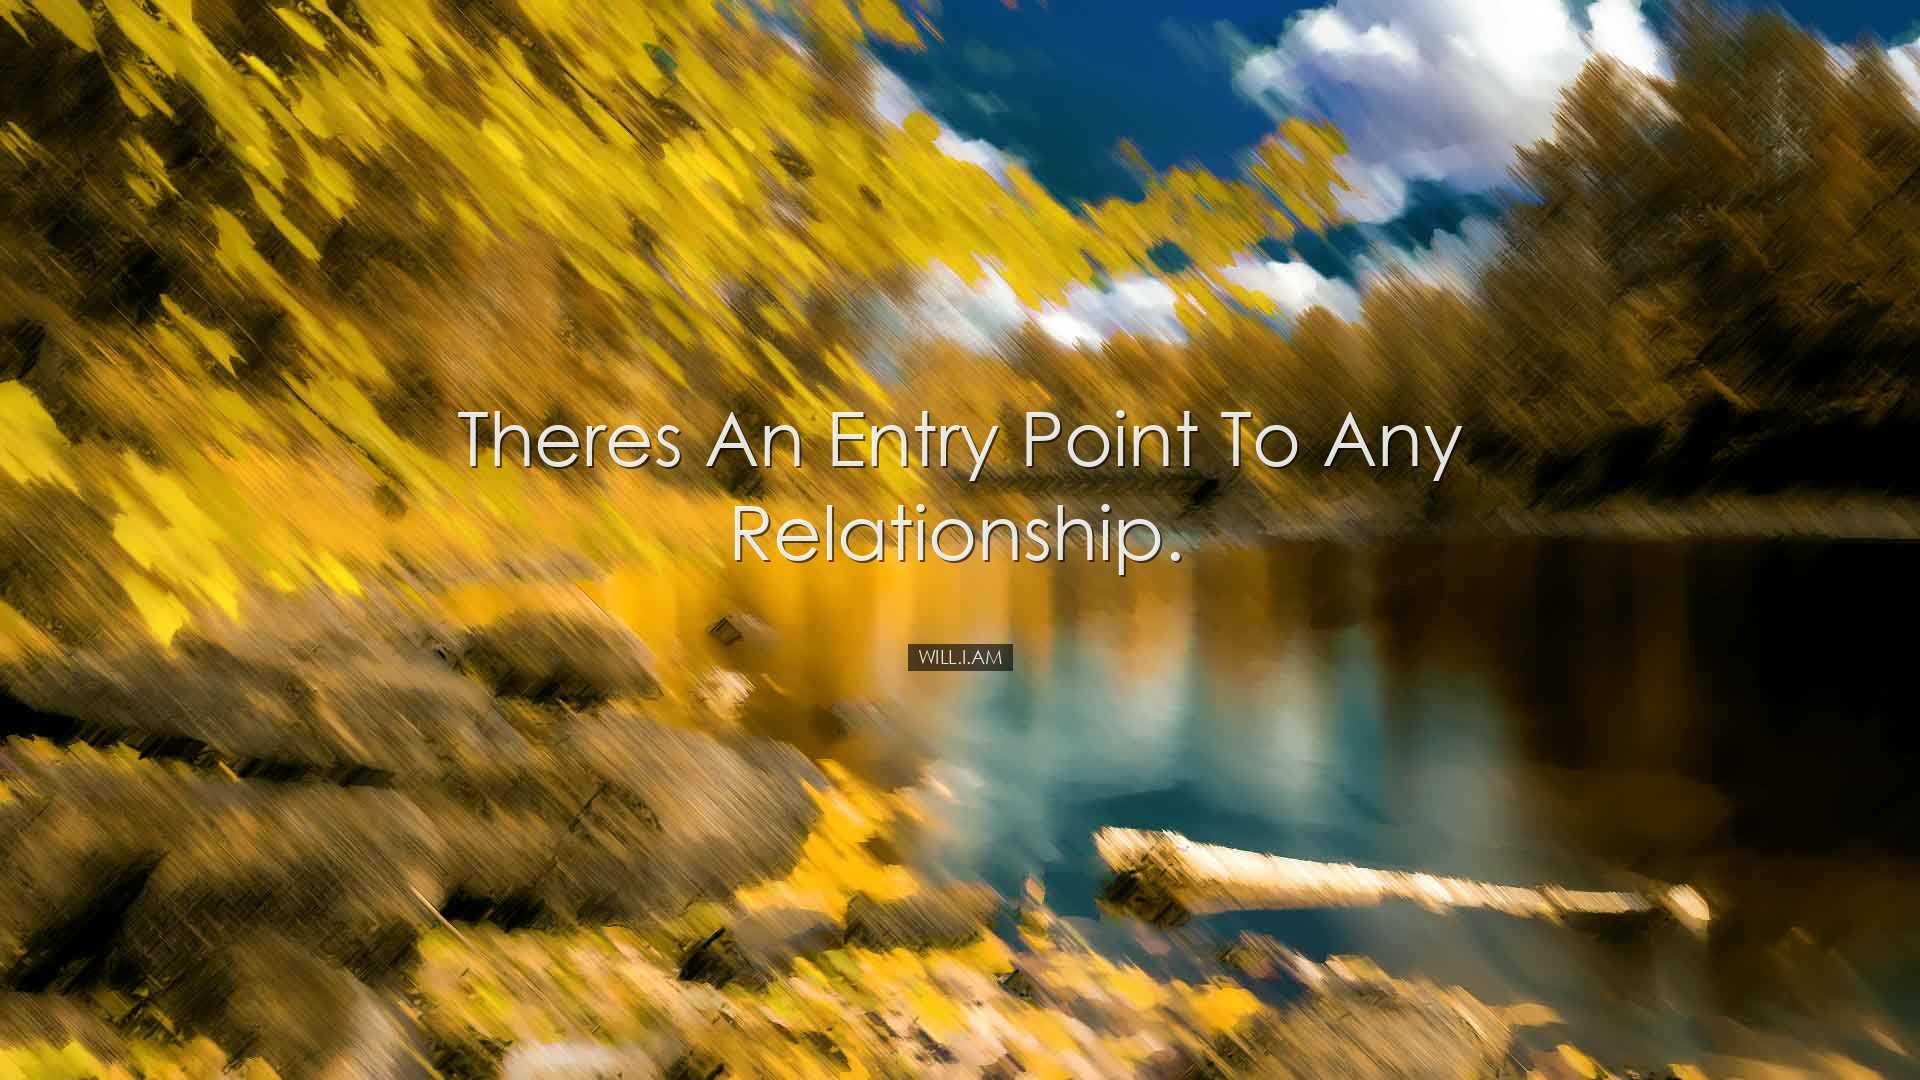 Theres an entry point to any relationship. - will.i.am